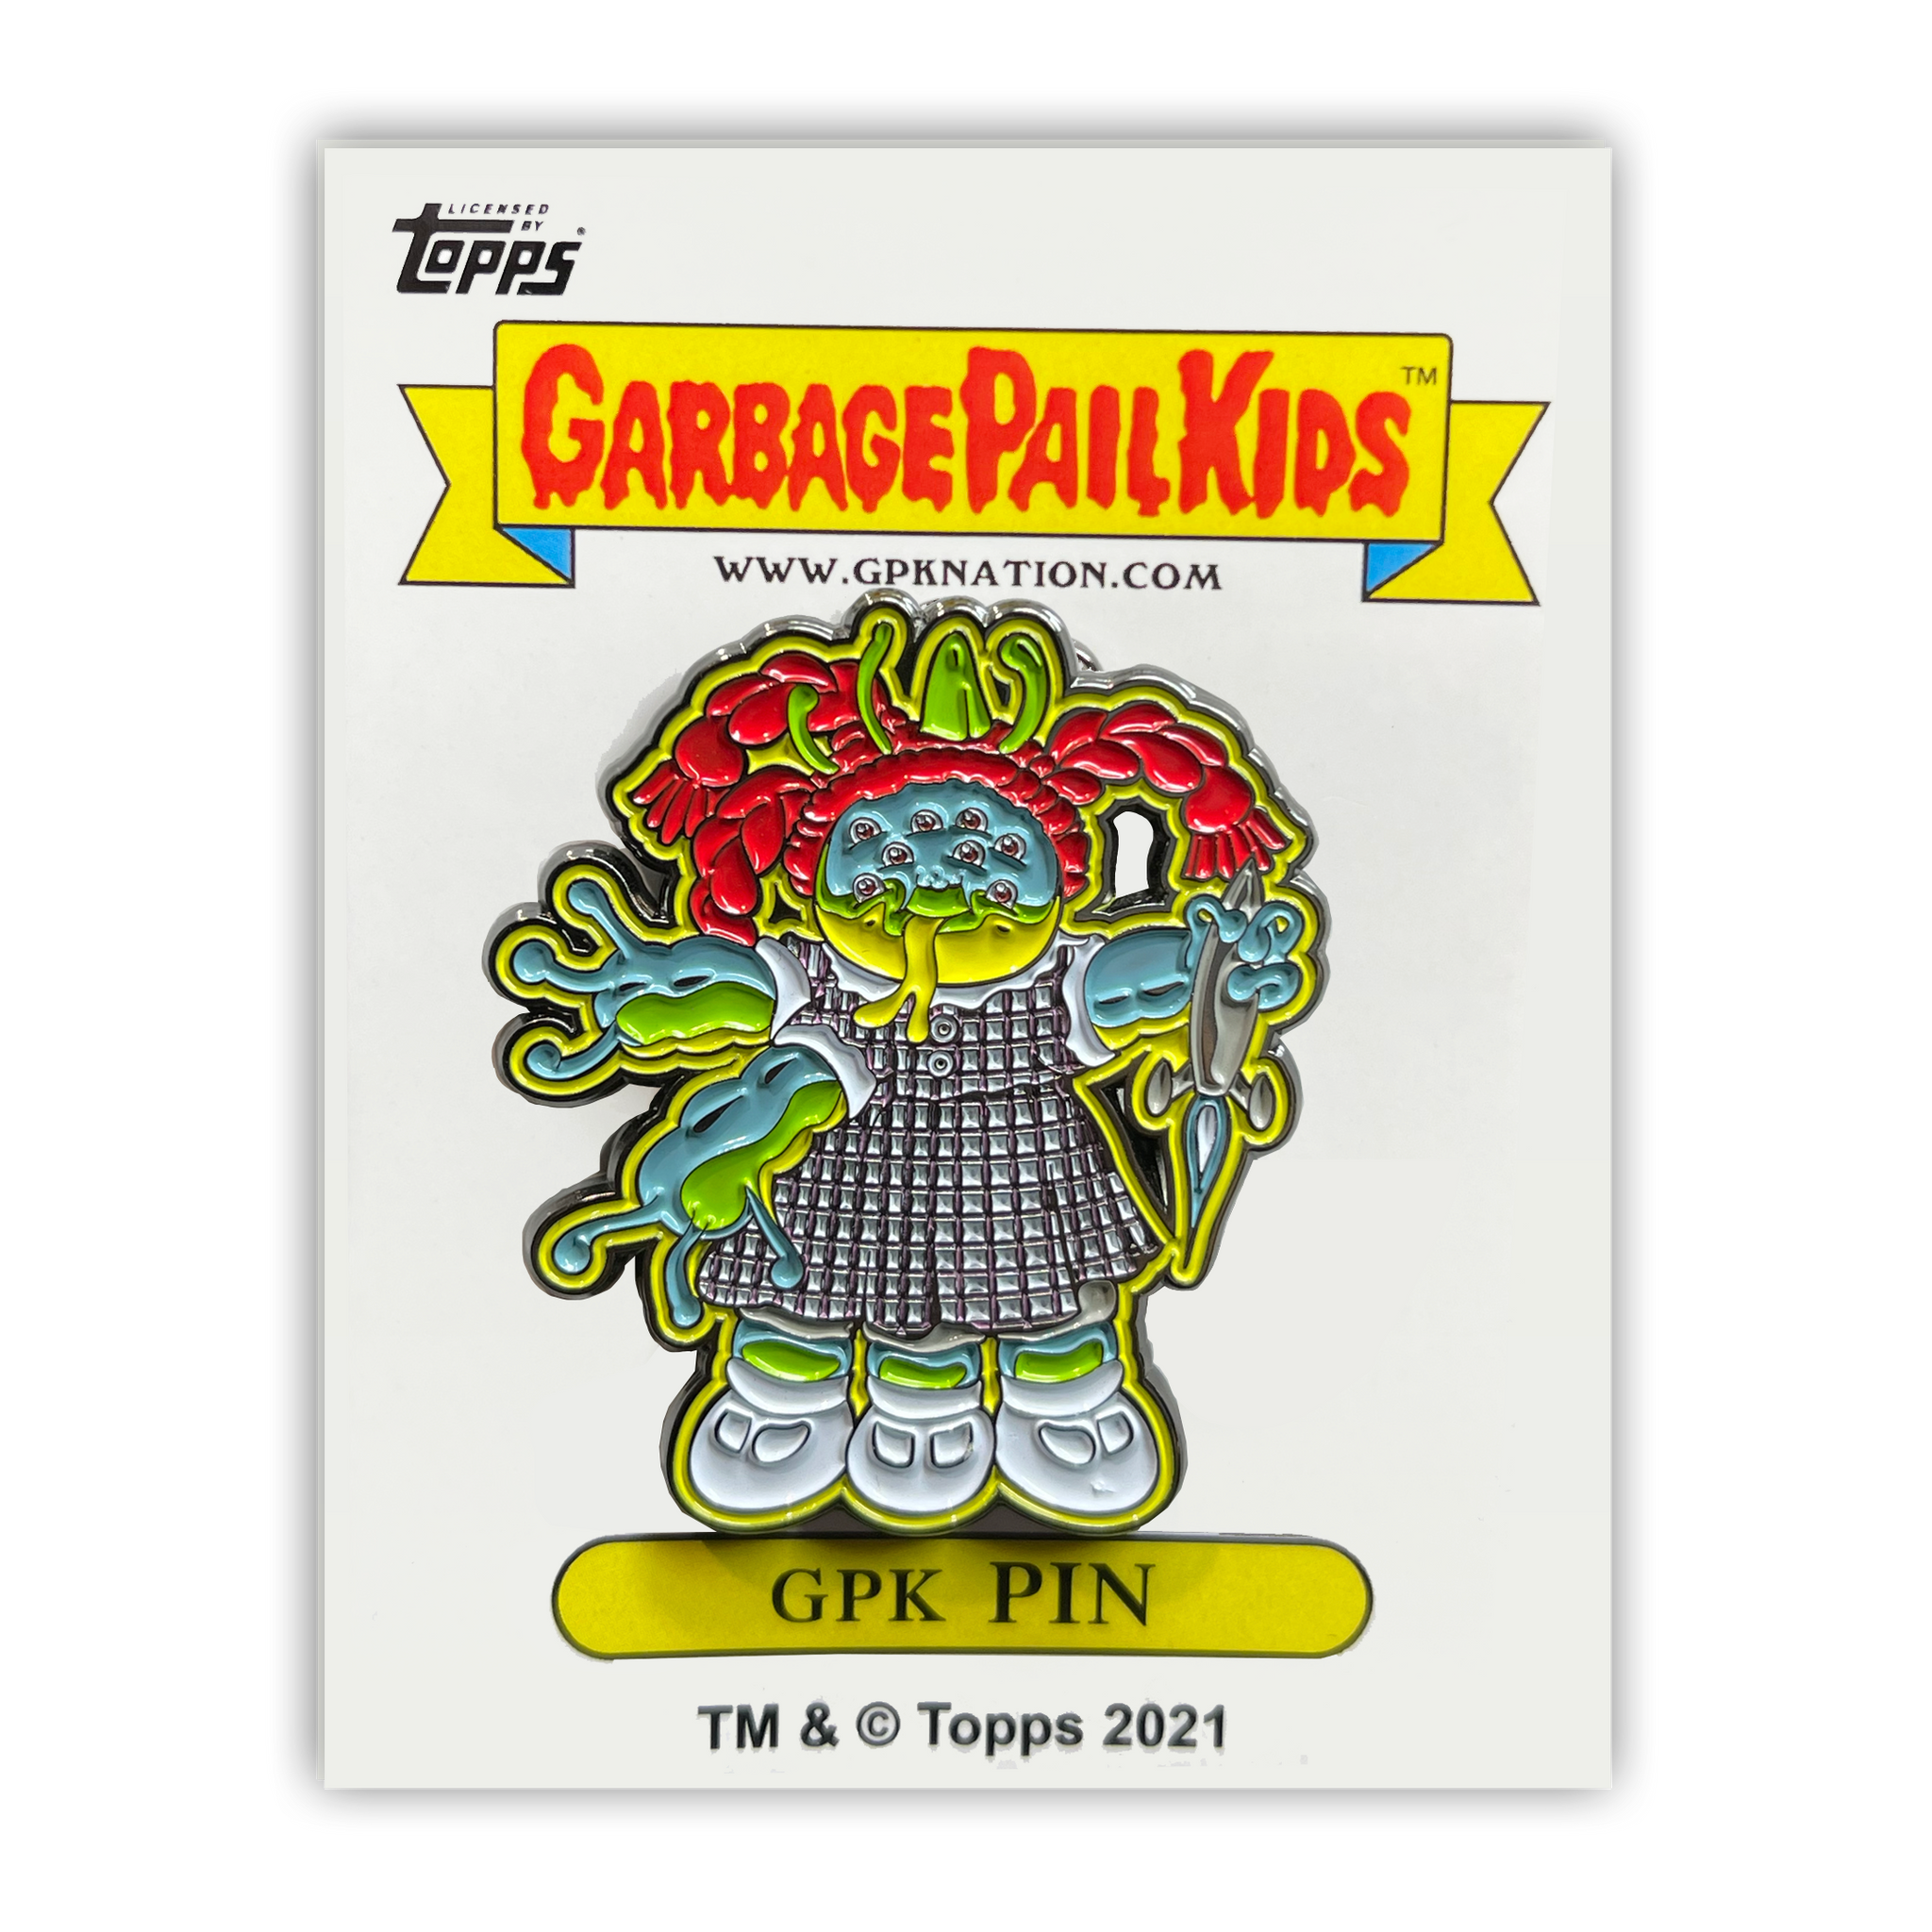 GPK-PP-002 Topps Officially Licensed GPK Spacey Stacy / Janet Planet Garbage Pail Kids Limited Edition pins